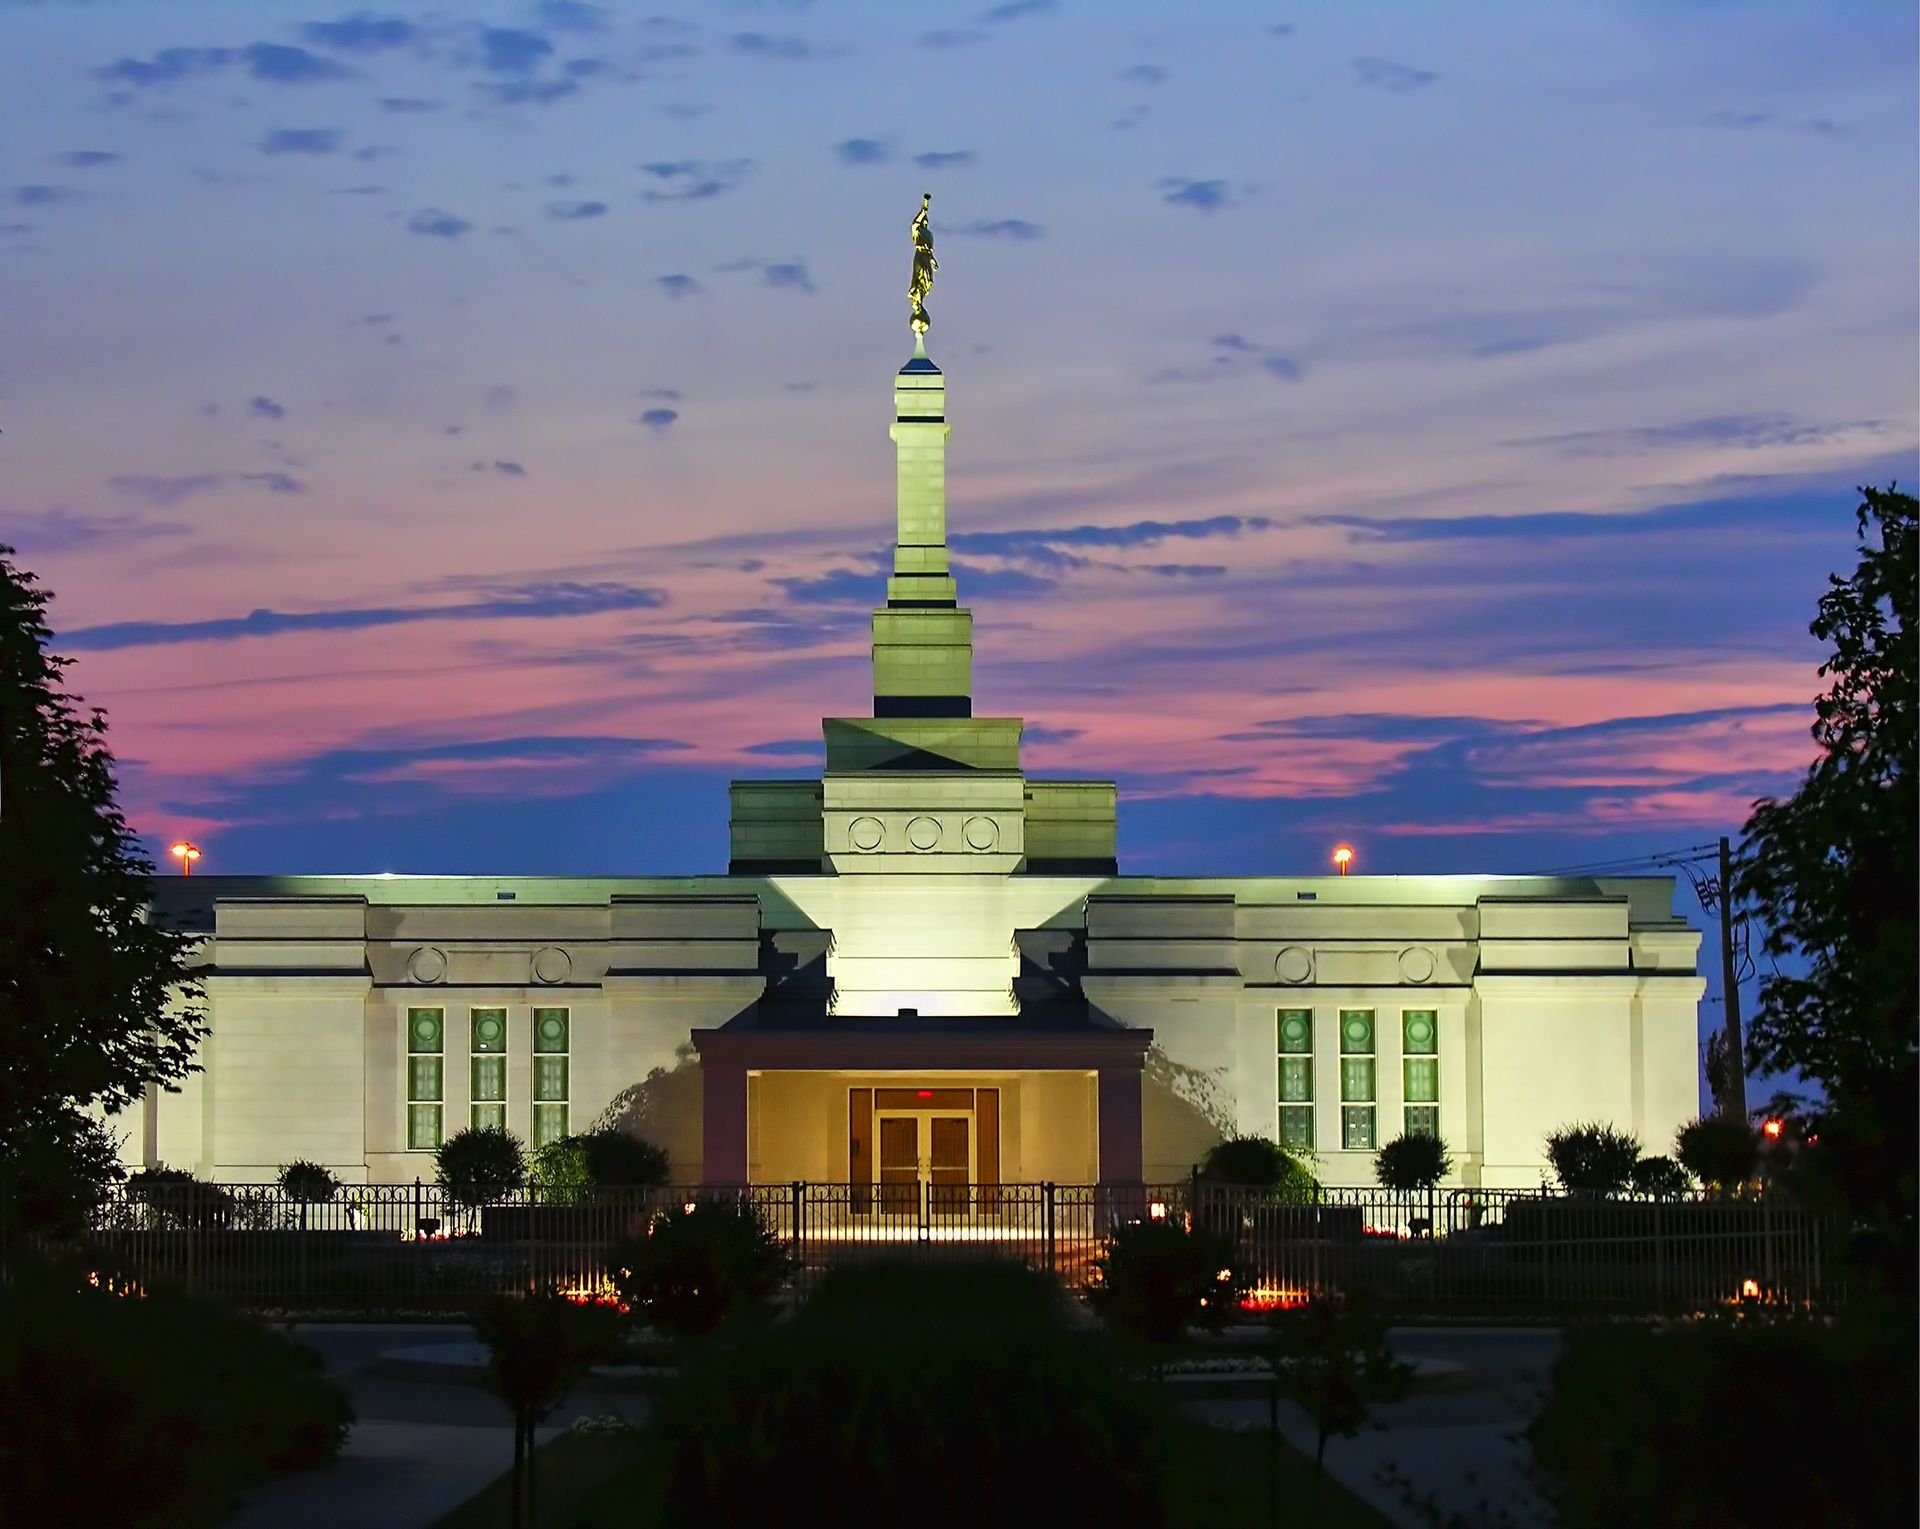 The Montreal Quebec Temple in the evening, including entrance and scenery.